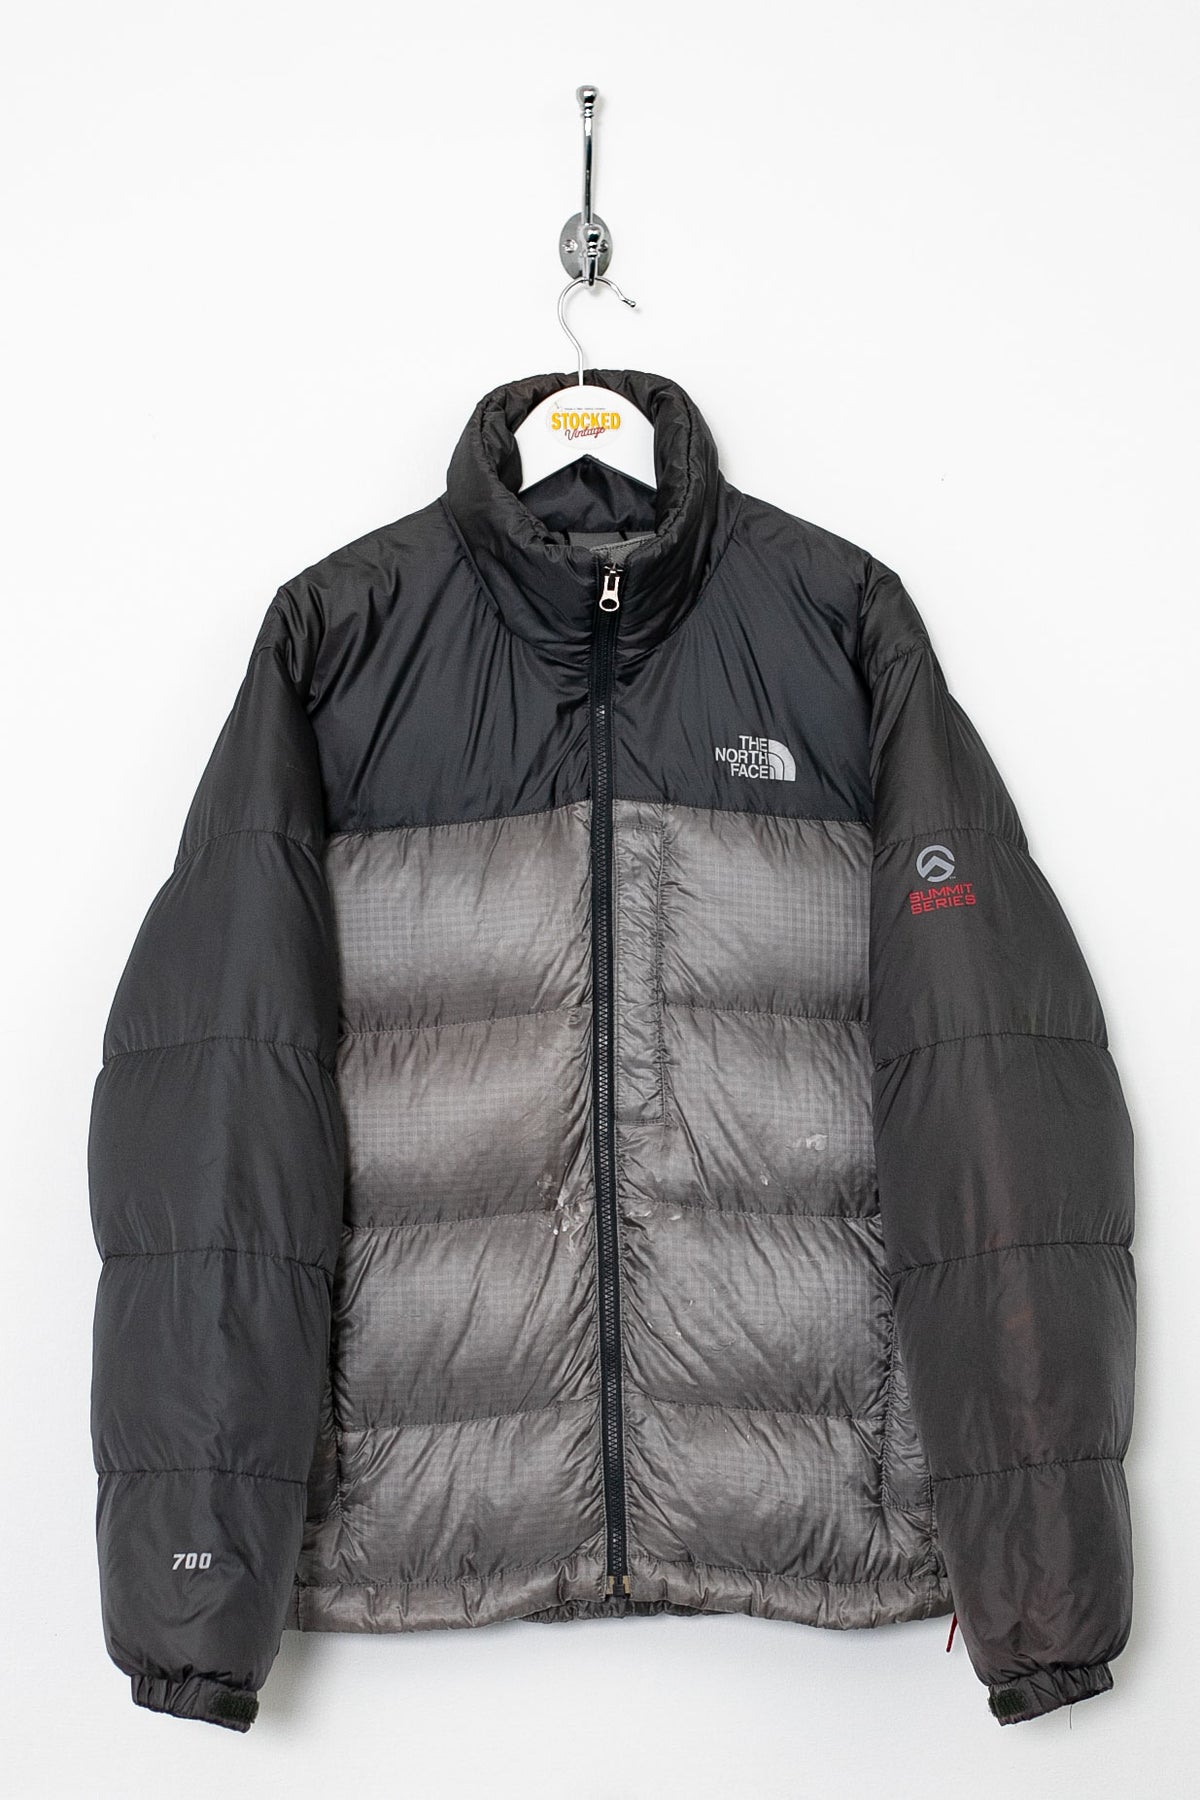 The North Face 700 Fill Summit Series Puffer Jacket (M)